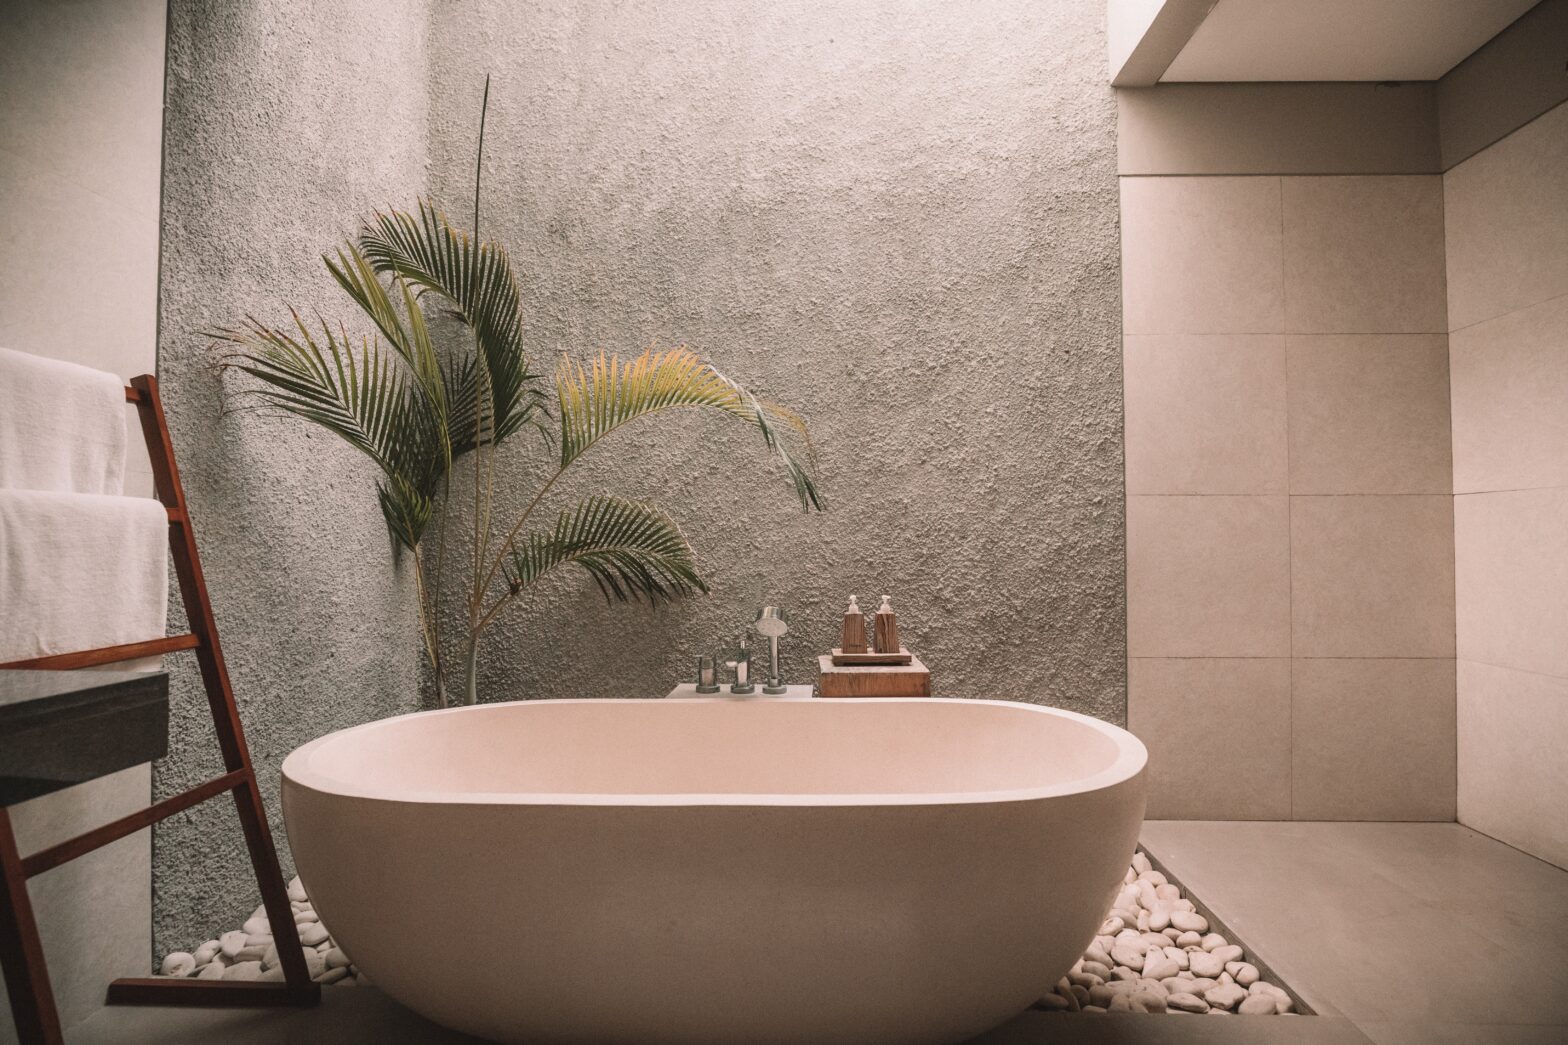 Essential Items That Turn Any Hotel Bathroom Into A Zen, Spa-Like Experience